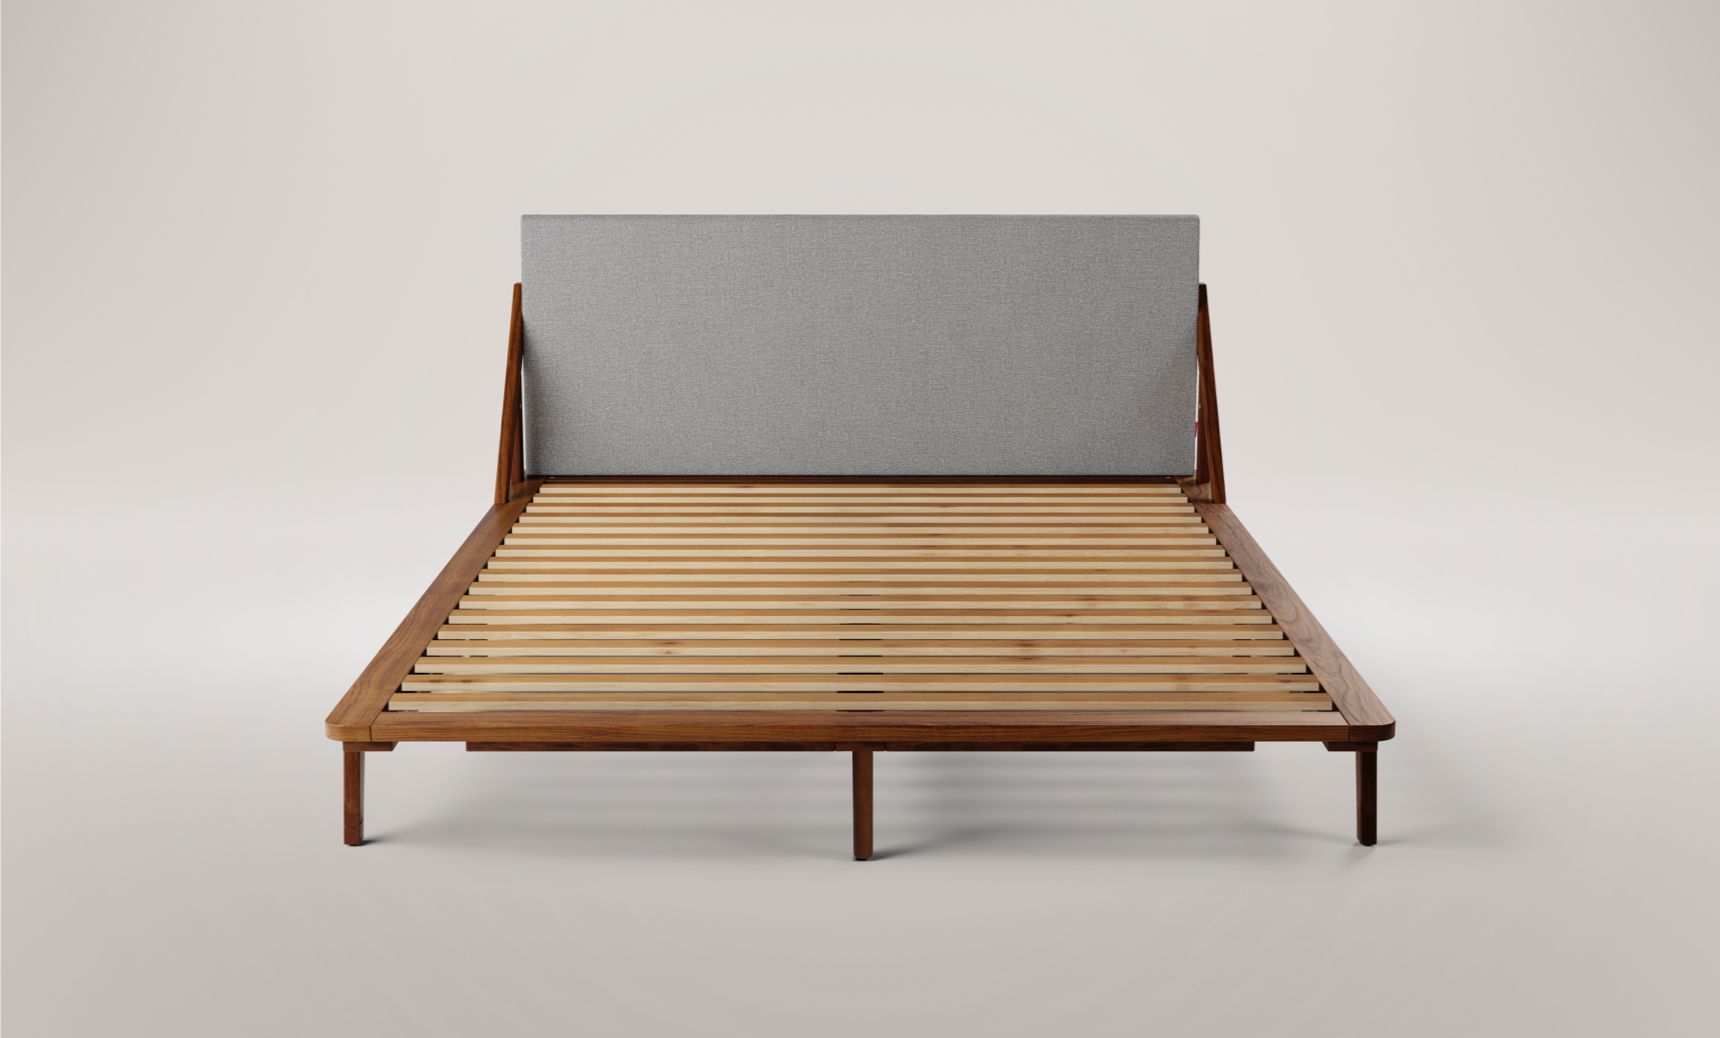 The Endy Solid Wood Bed